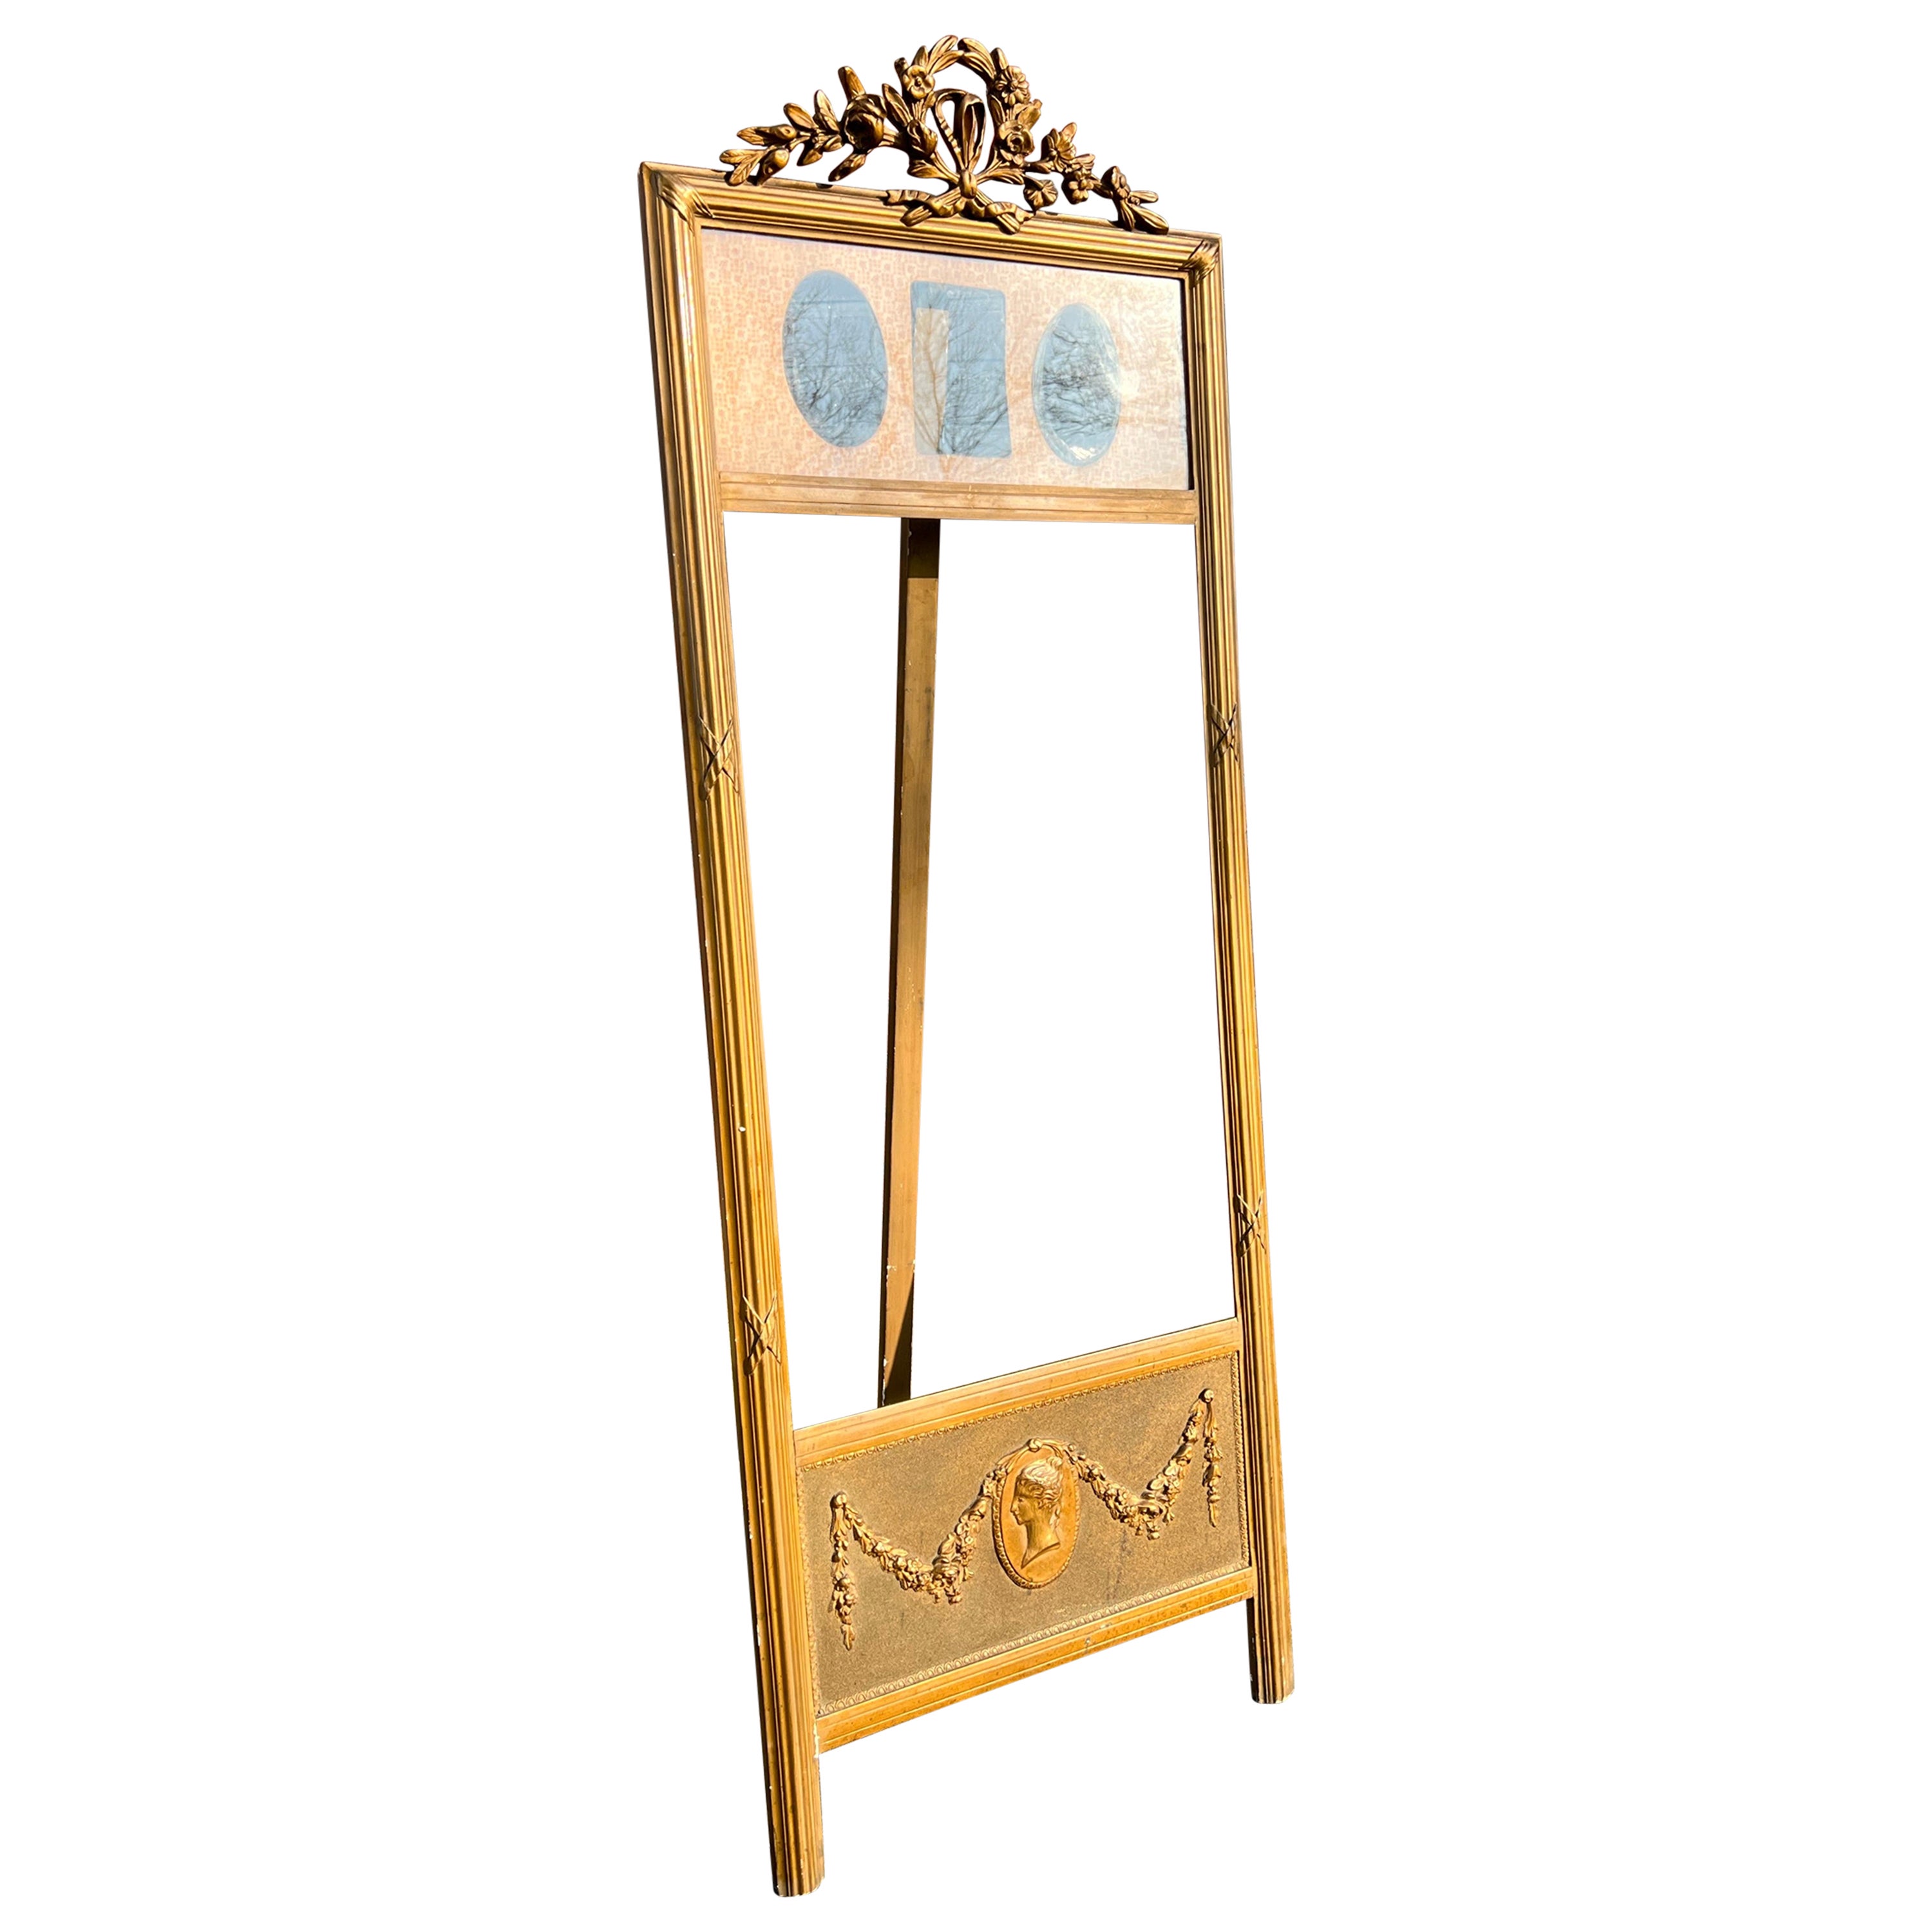 Rare Antique Gilt Wooden Mirror or Picture Floor Easel / Display Stand, 1900s